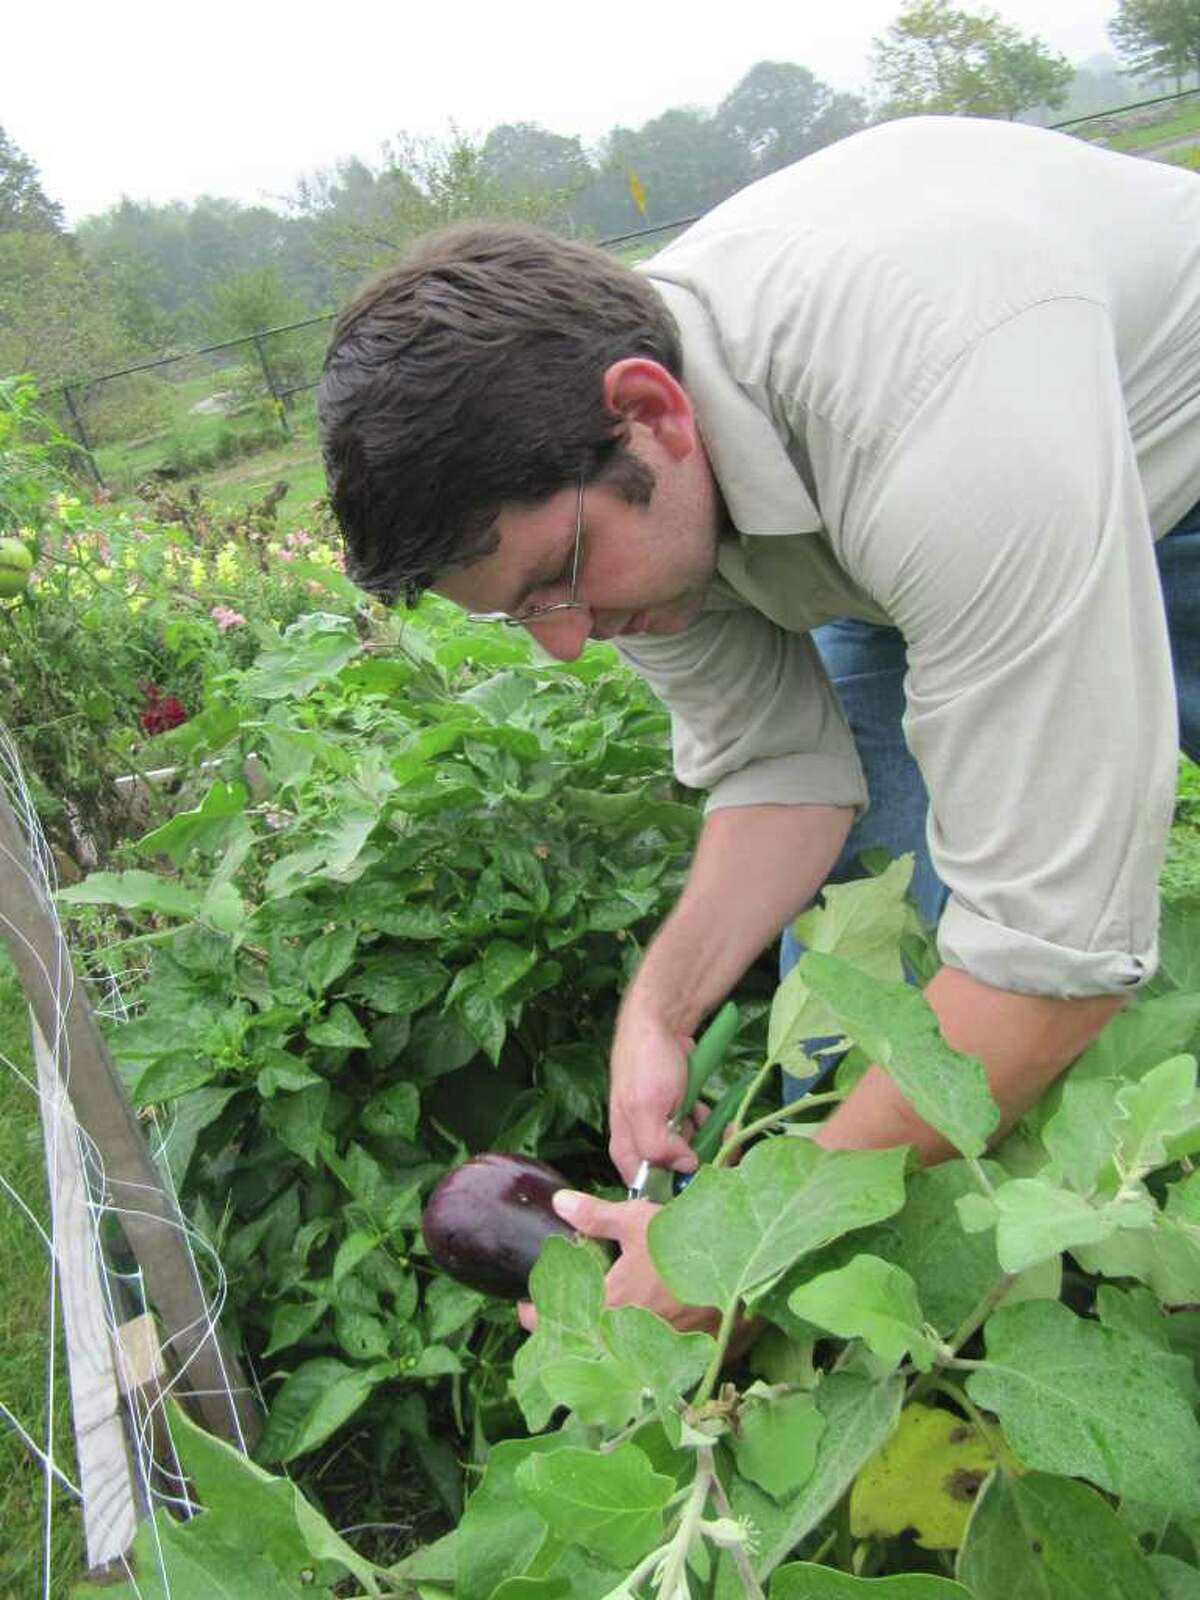 Staples High School environmental science teacher Mike Aitkenhead - forced to vacate the Wakeman Town Farm & Sustainability Center last month when Green Village Initiative ended its lease with the town - will soon be back on the site with his family. In this photo, Aitkenhead cuts an eggplant loose from one of the vegetable gardens.